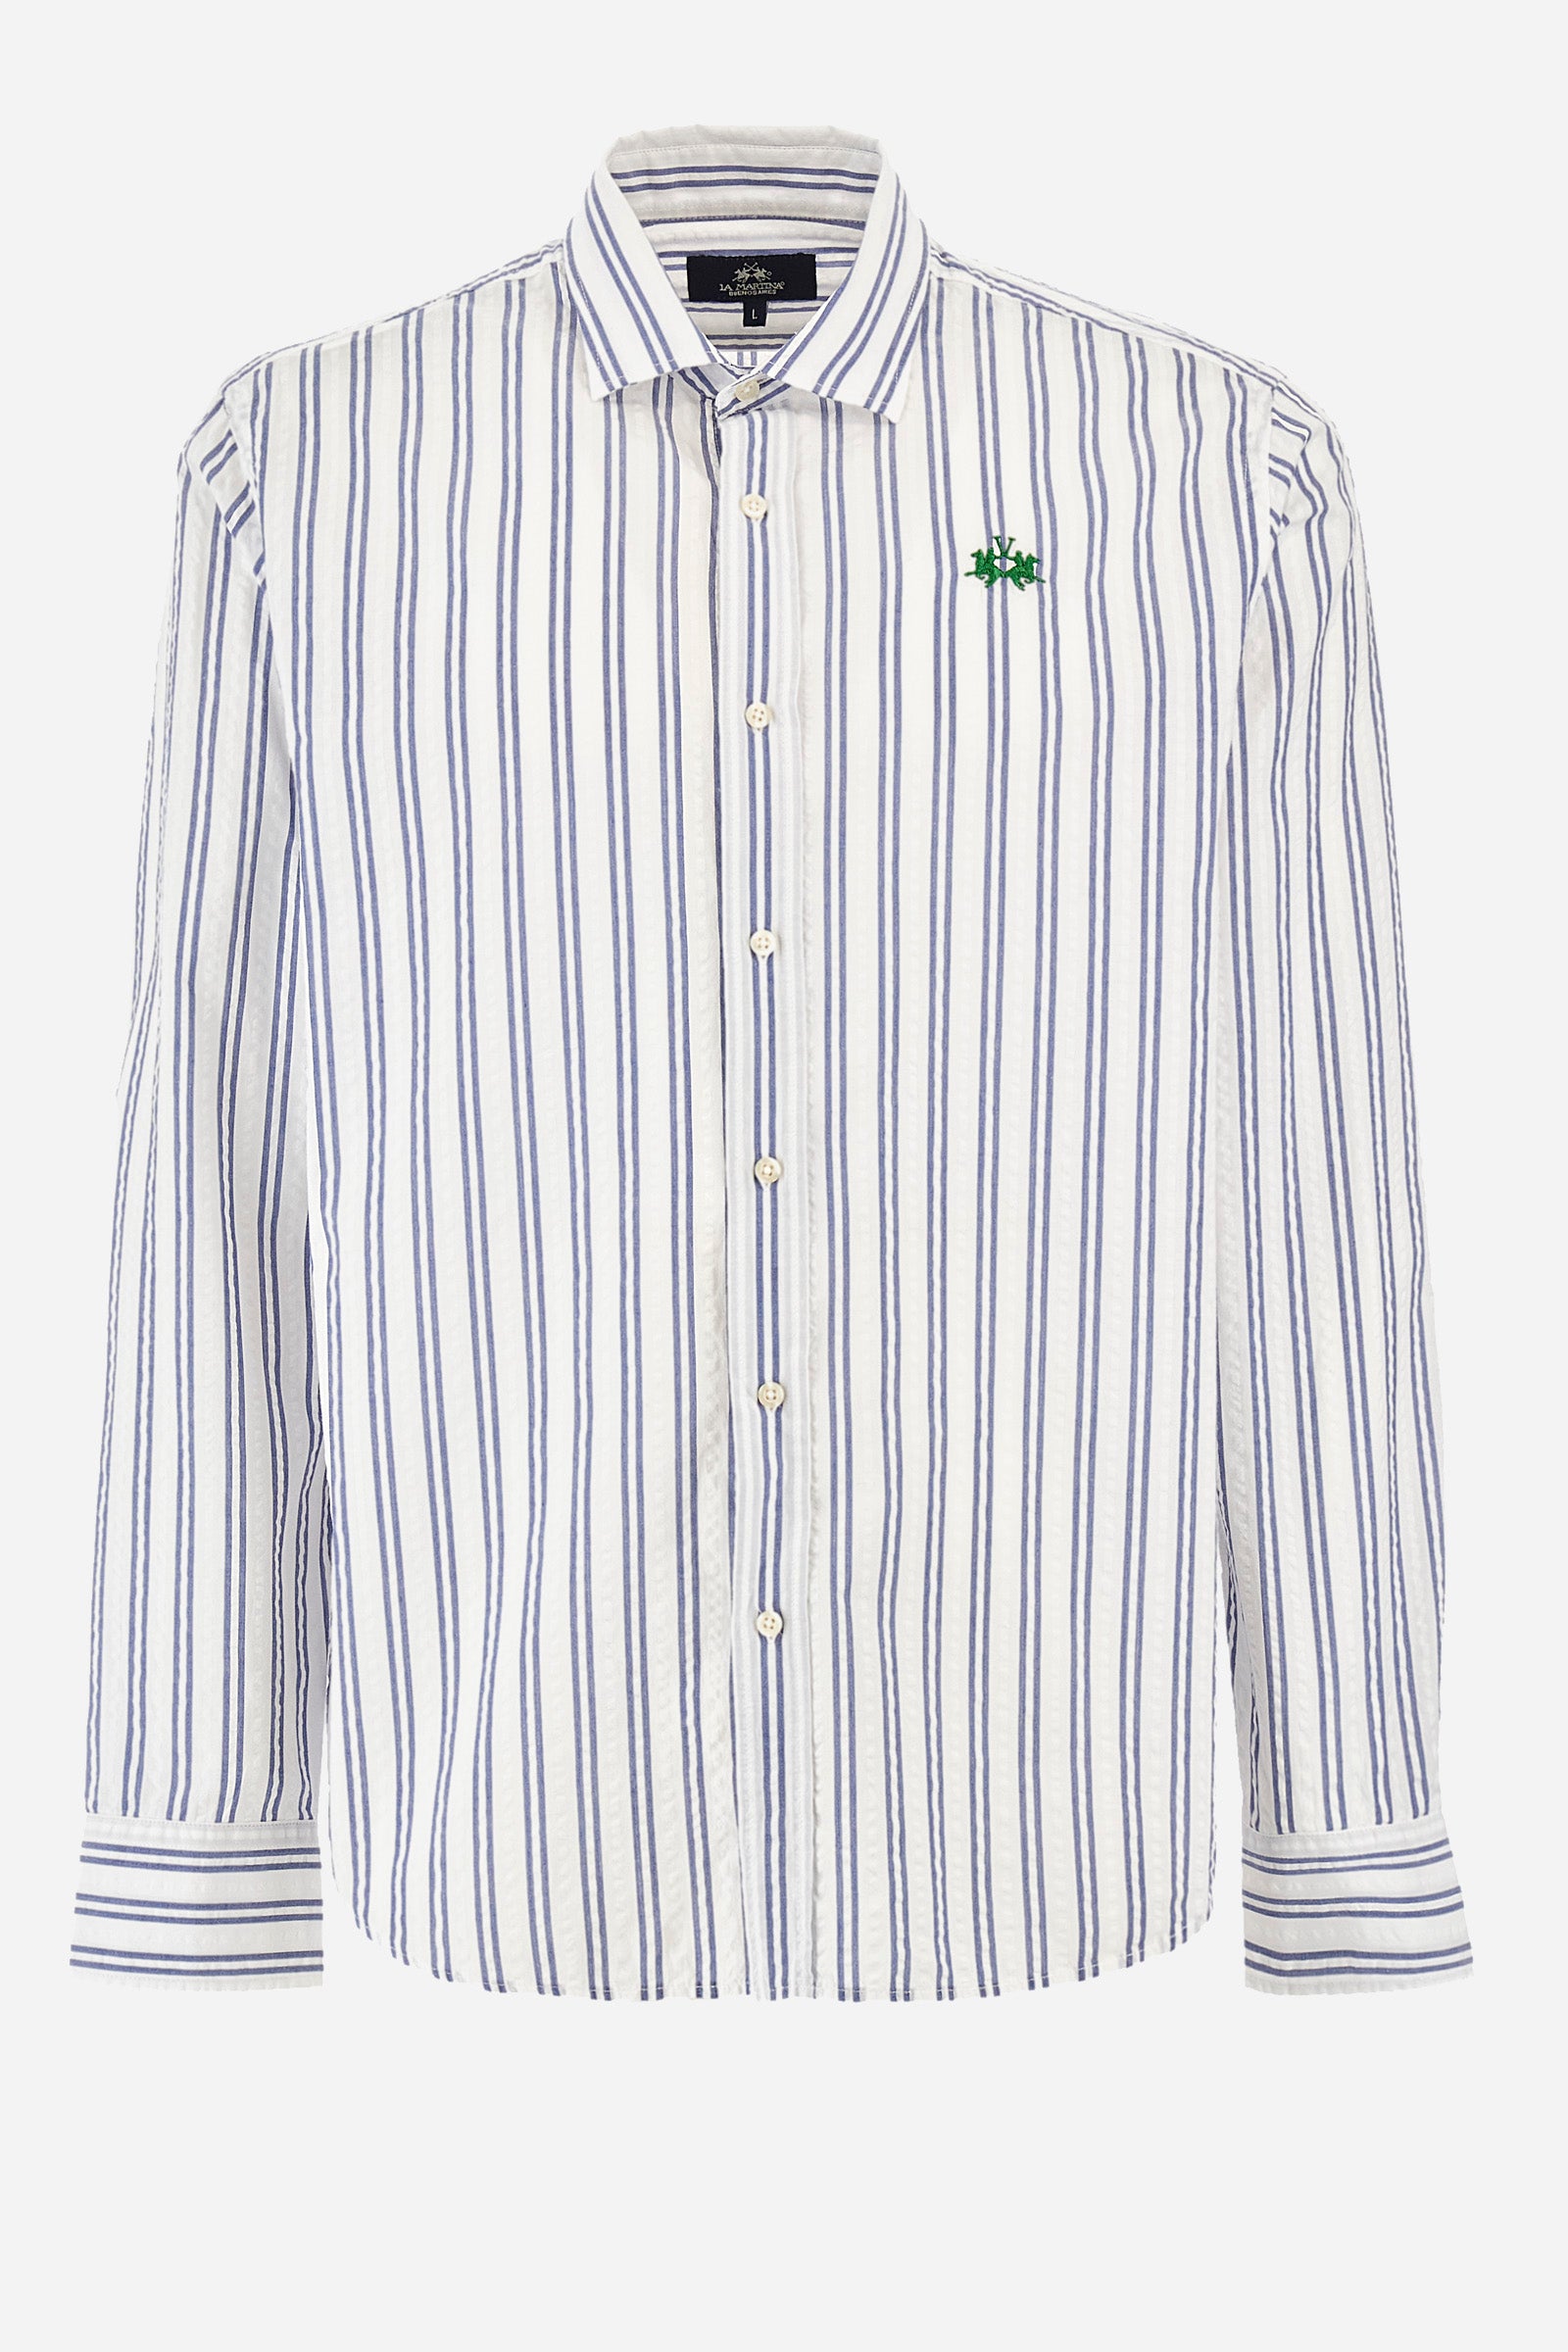 Cotton shirt with a striped patterned - Innocent